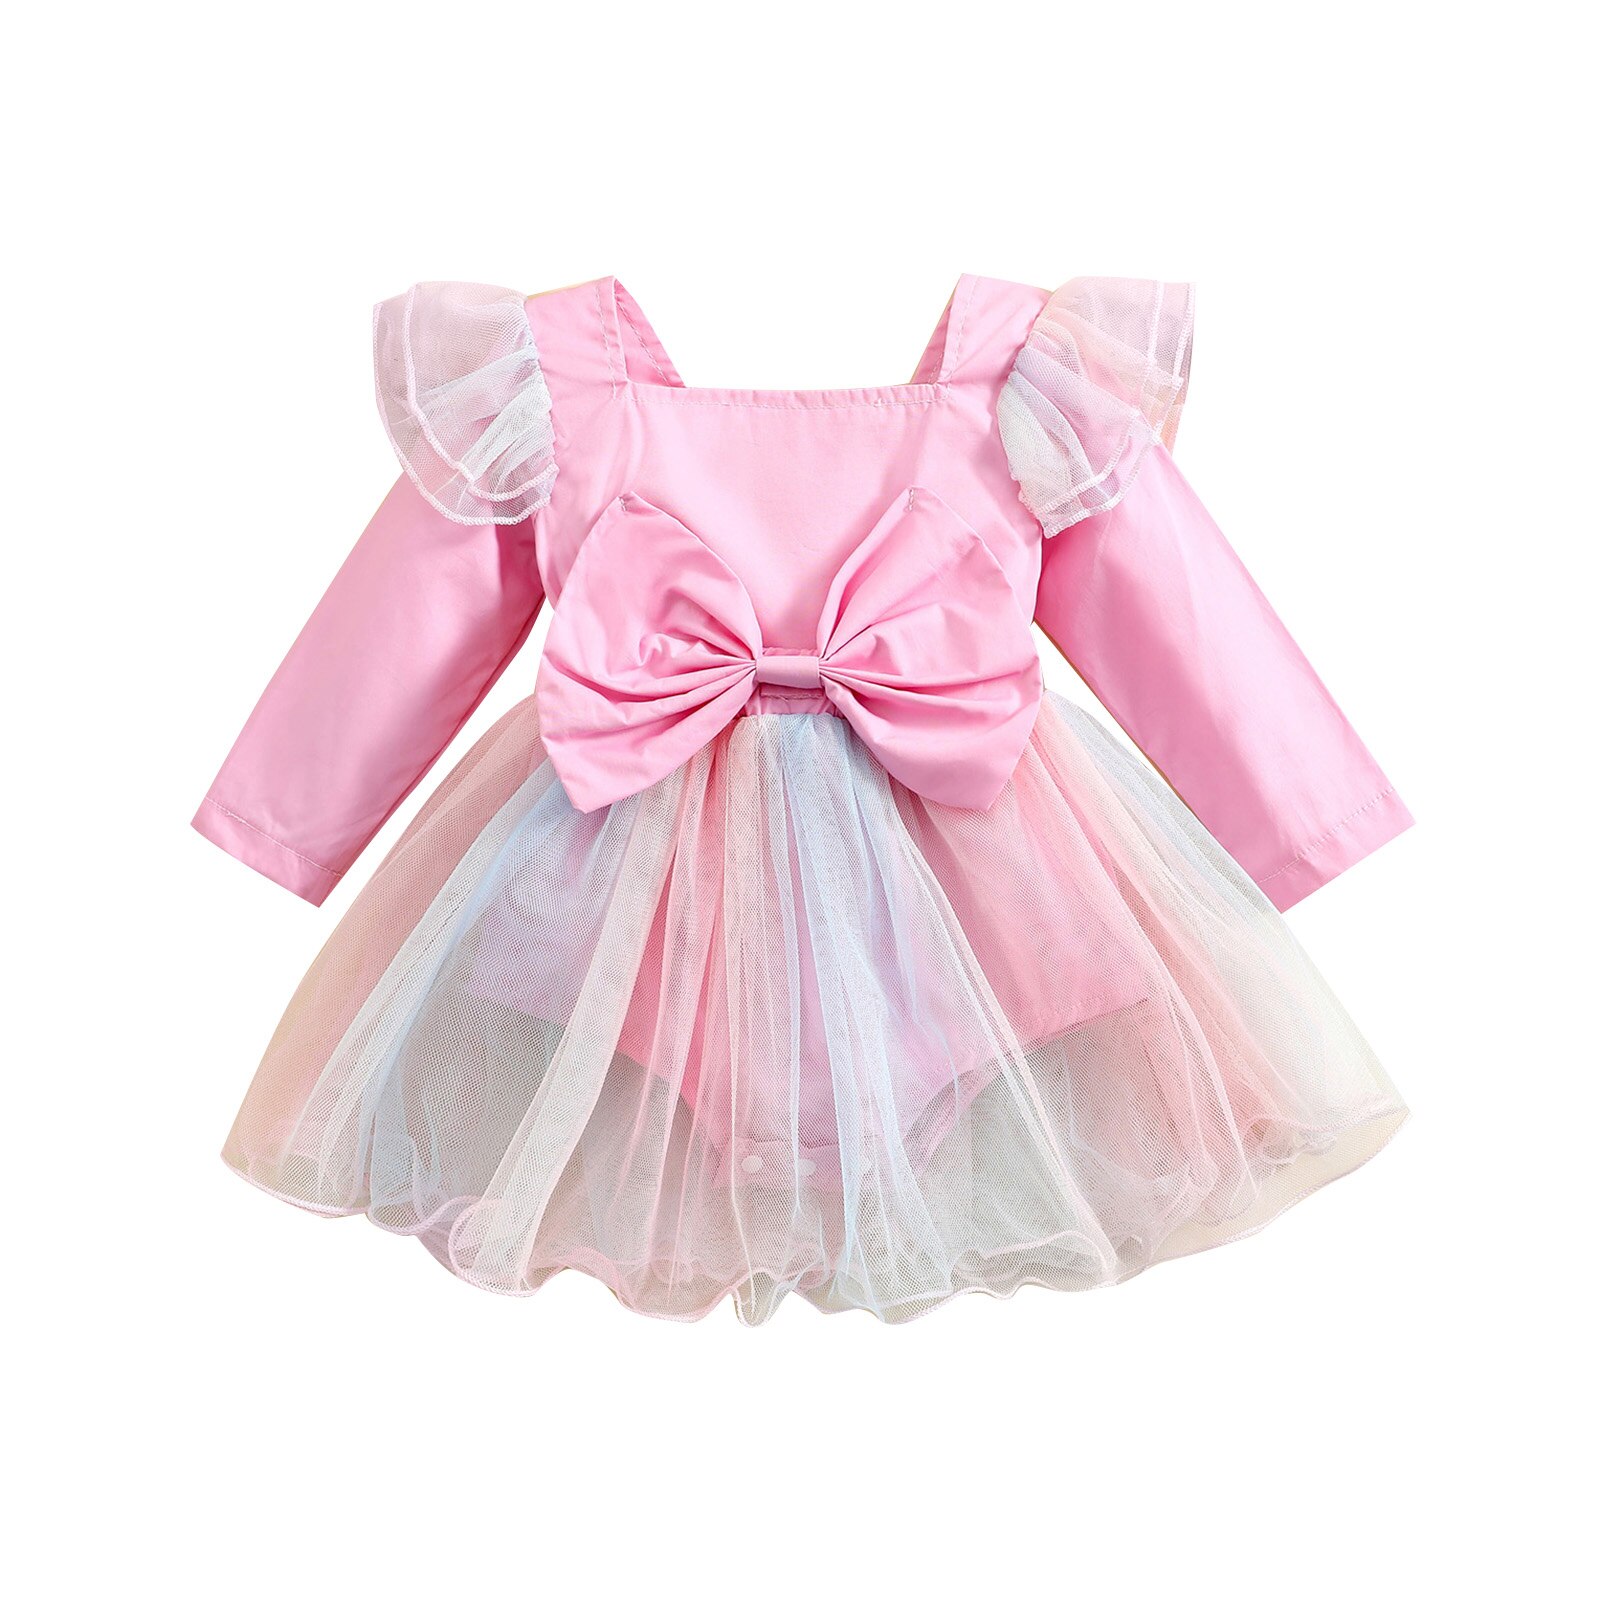 Citgeett-Autumn-Infant-Baby-Girls-Bodysuit-Long-Sleeve-Bowknot-Tulle-Patchwork-Dress-Daily-Party-Clothes-5